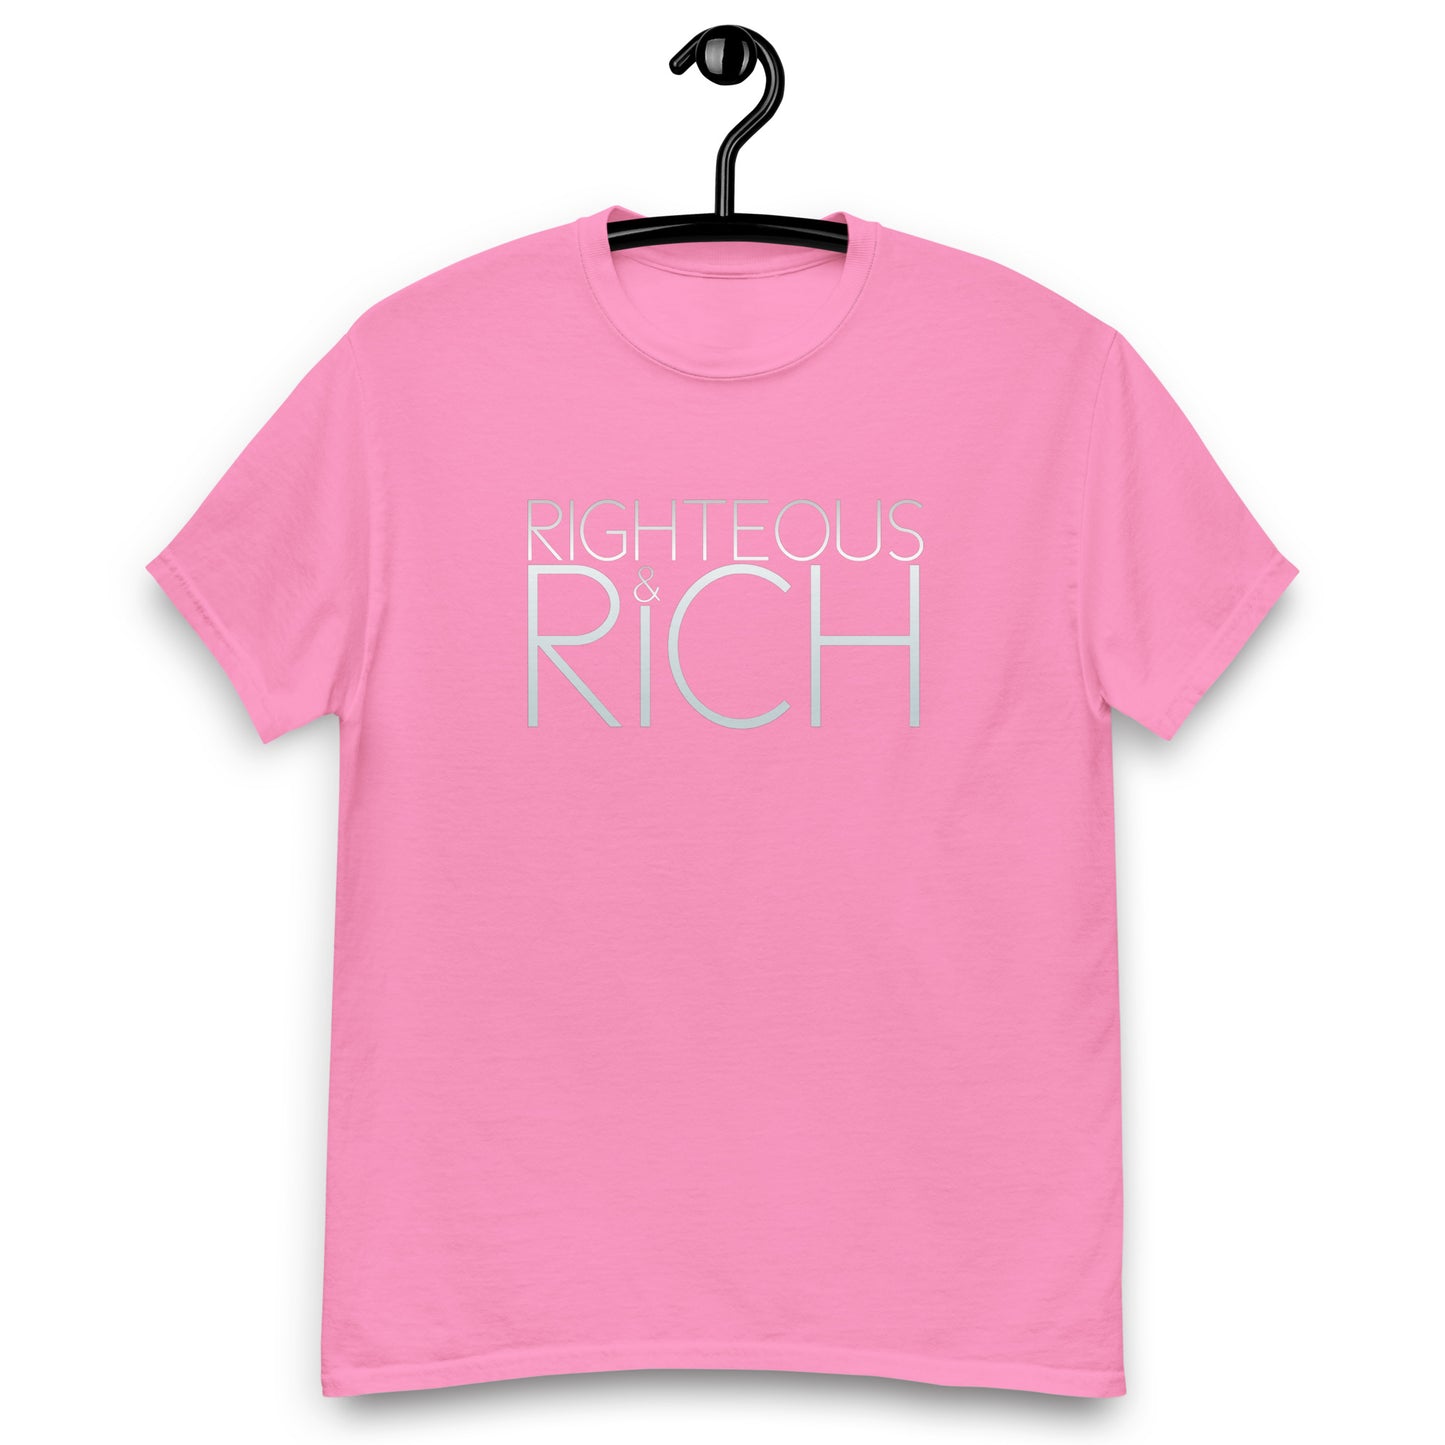 Righteous & Rich Unisex Tee